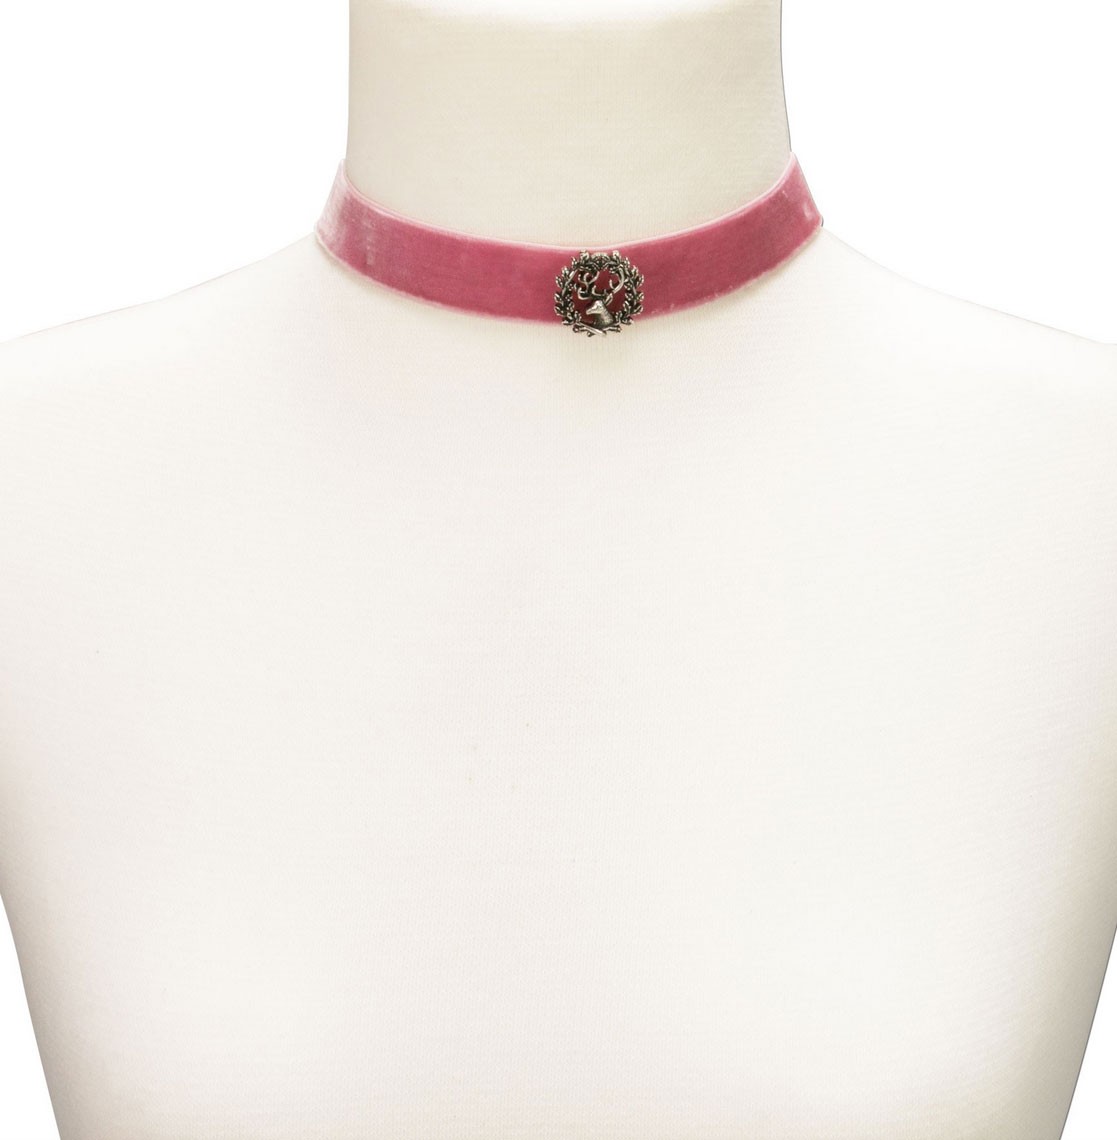 Preview: Traditional Choker with Deer Pin, Rose Pink